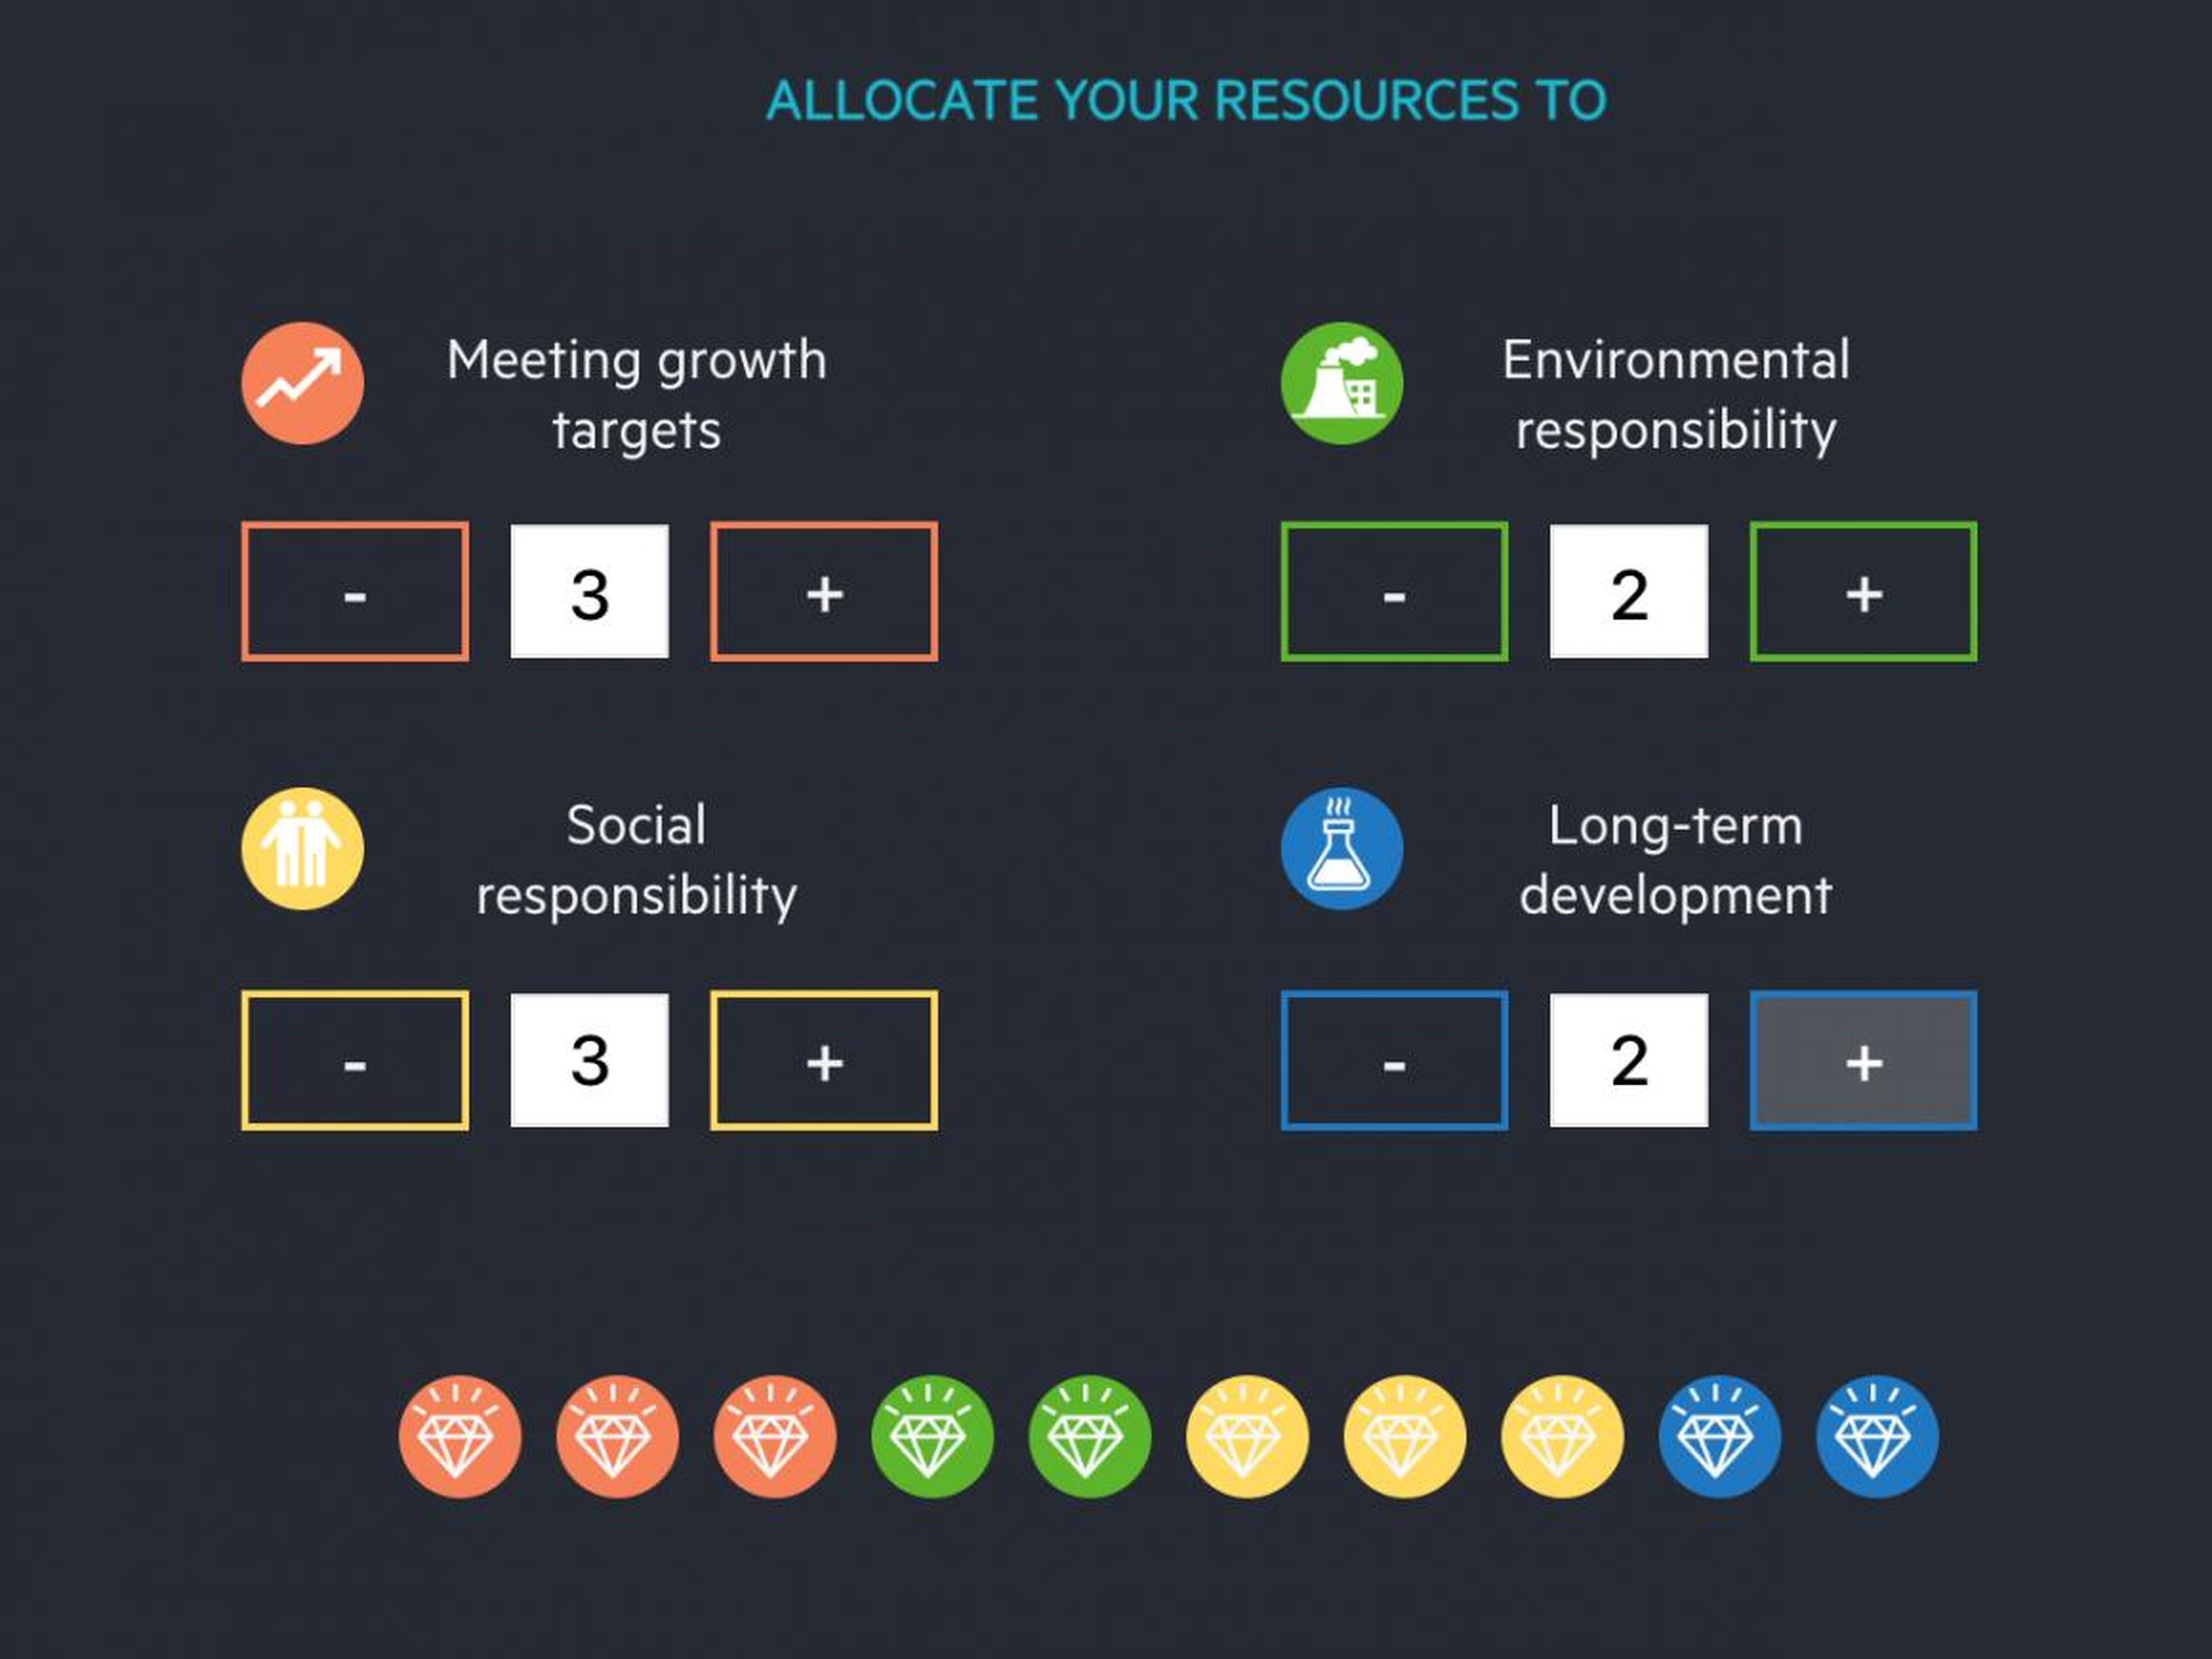 I spread my resources pretty evenly. I decided to focus on meeting growth targets and social responsibility, because it seemed like it had something for both groups I was trying to win over.